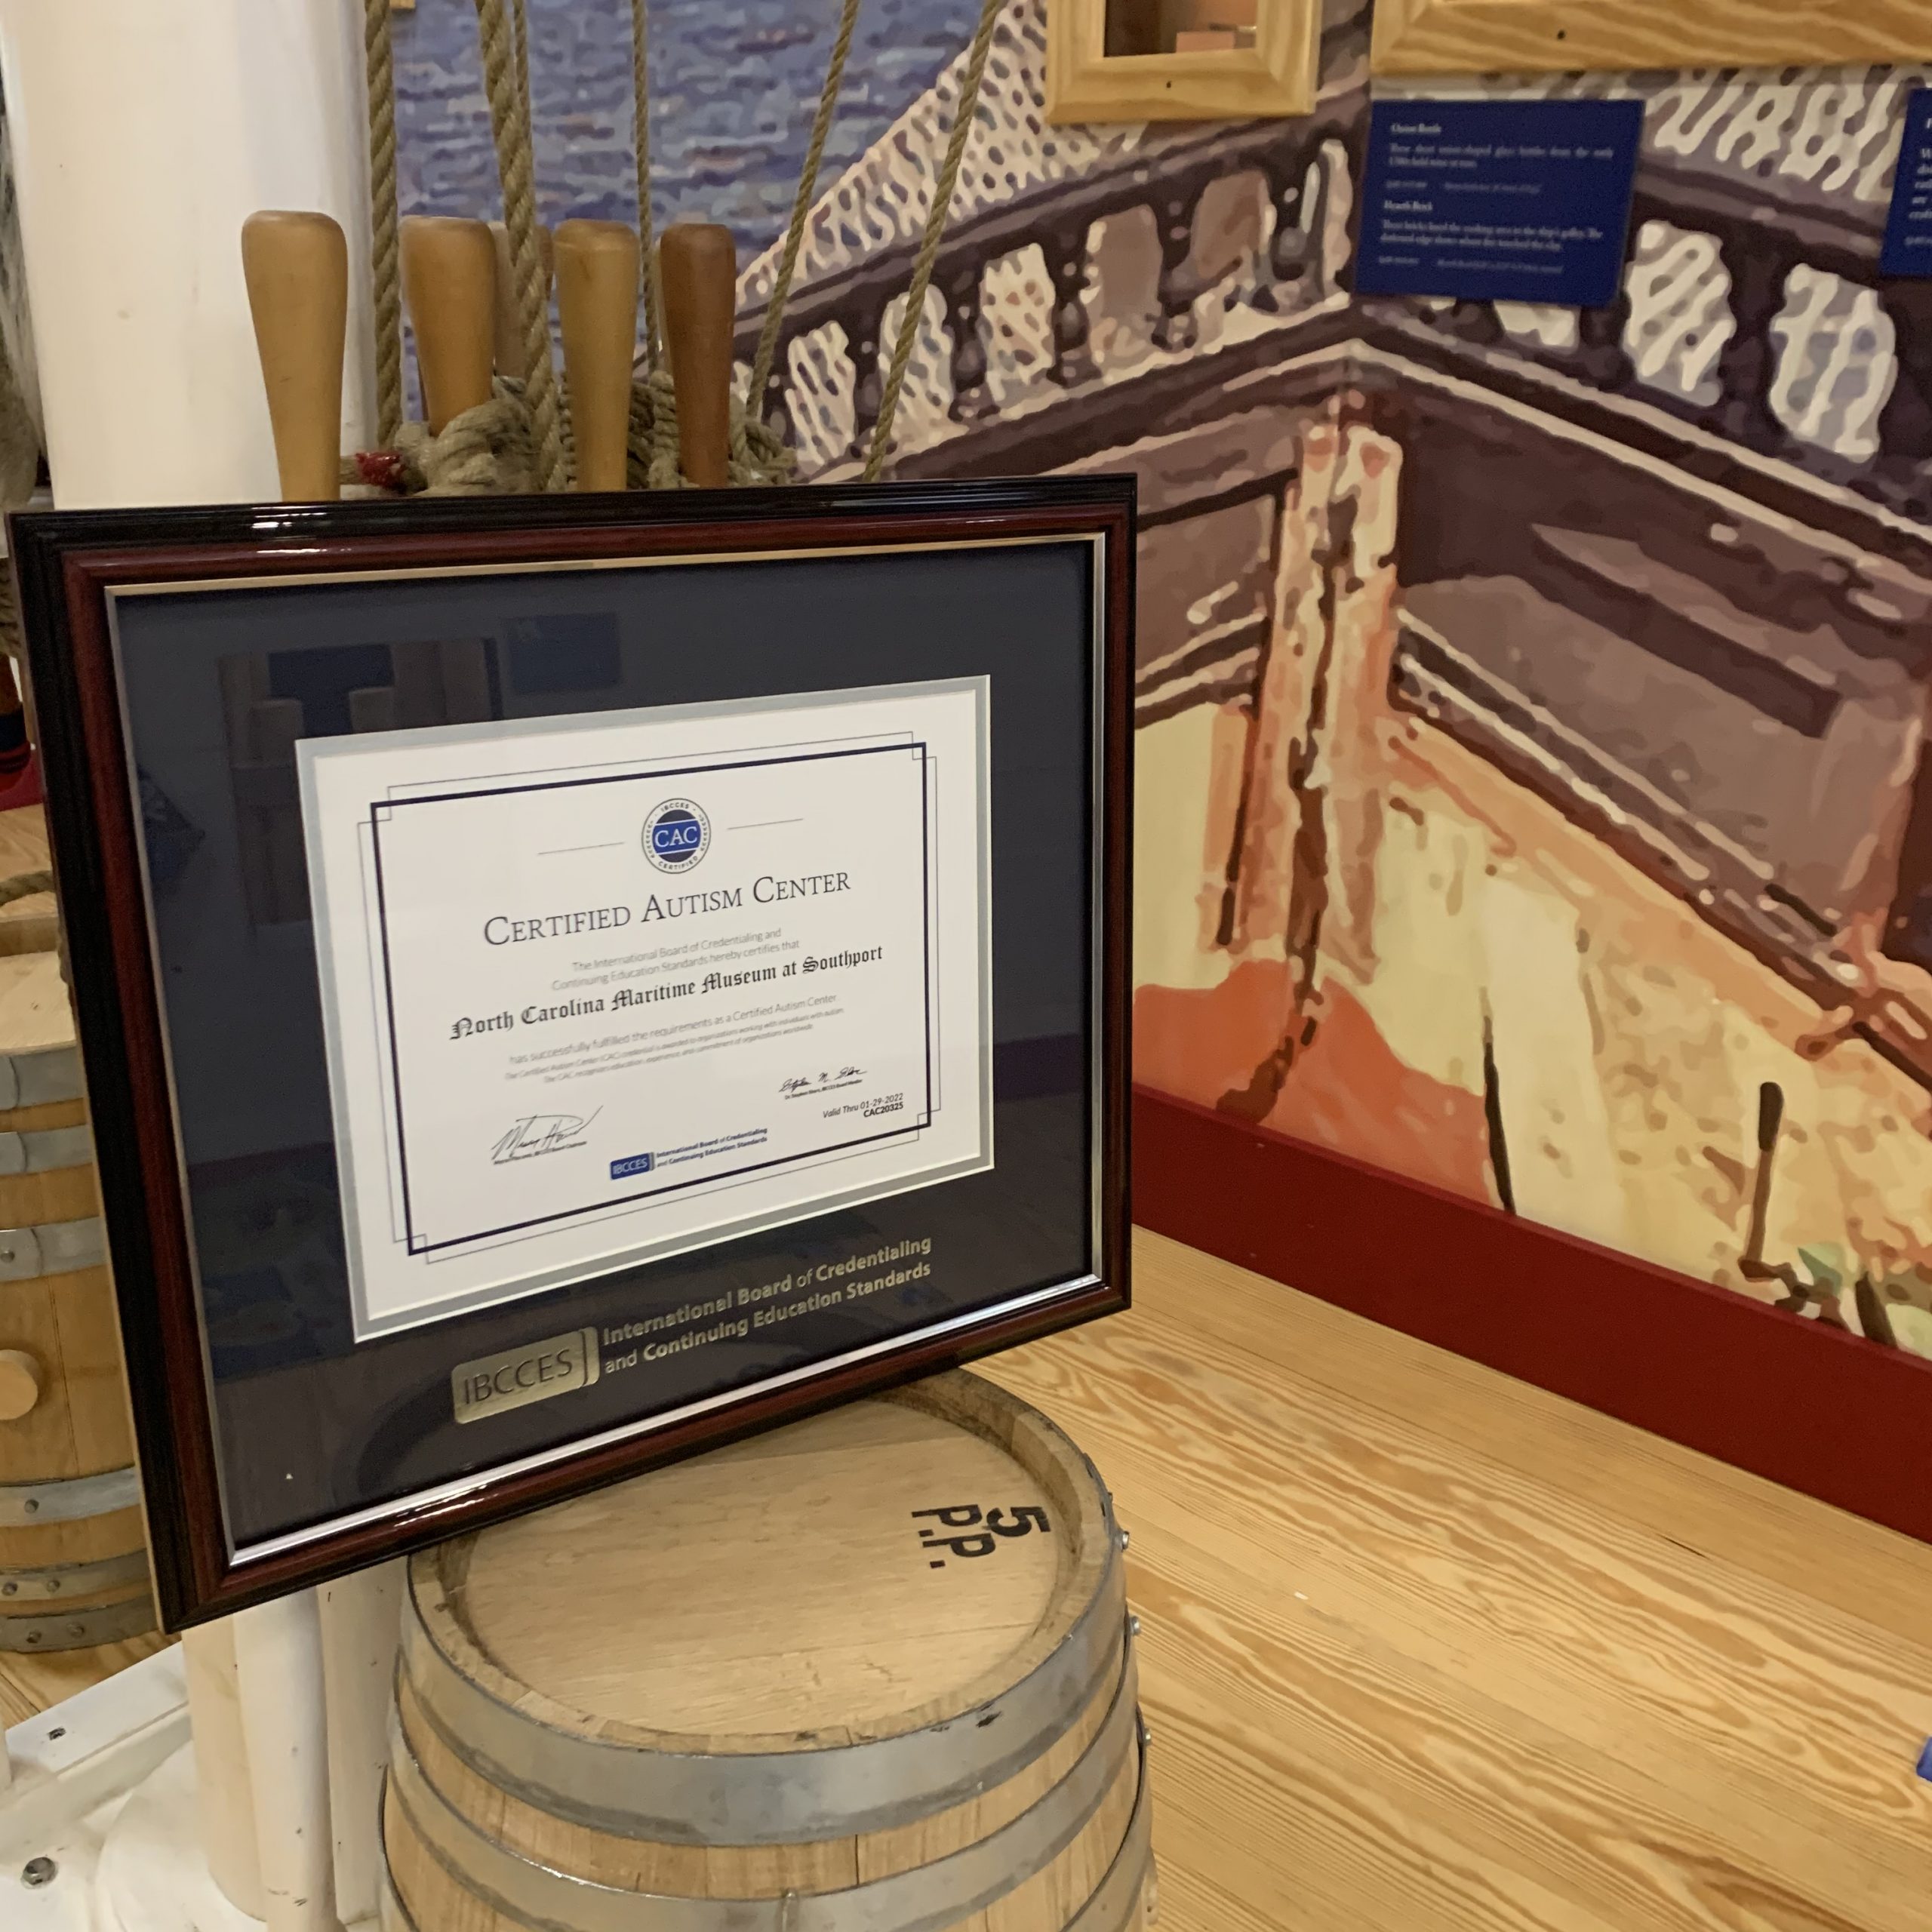 dark frame and matting surround a white with blue accent certificate leaned on top of a brown barrel and leaned against a white pillar in wooden floors and boat covered wall